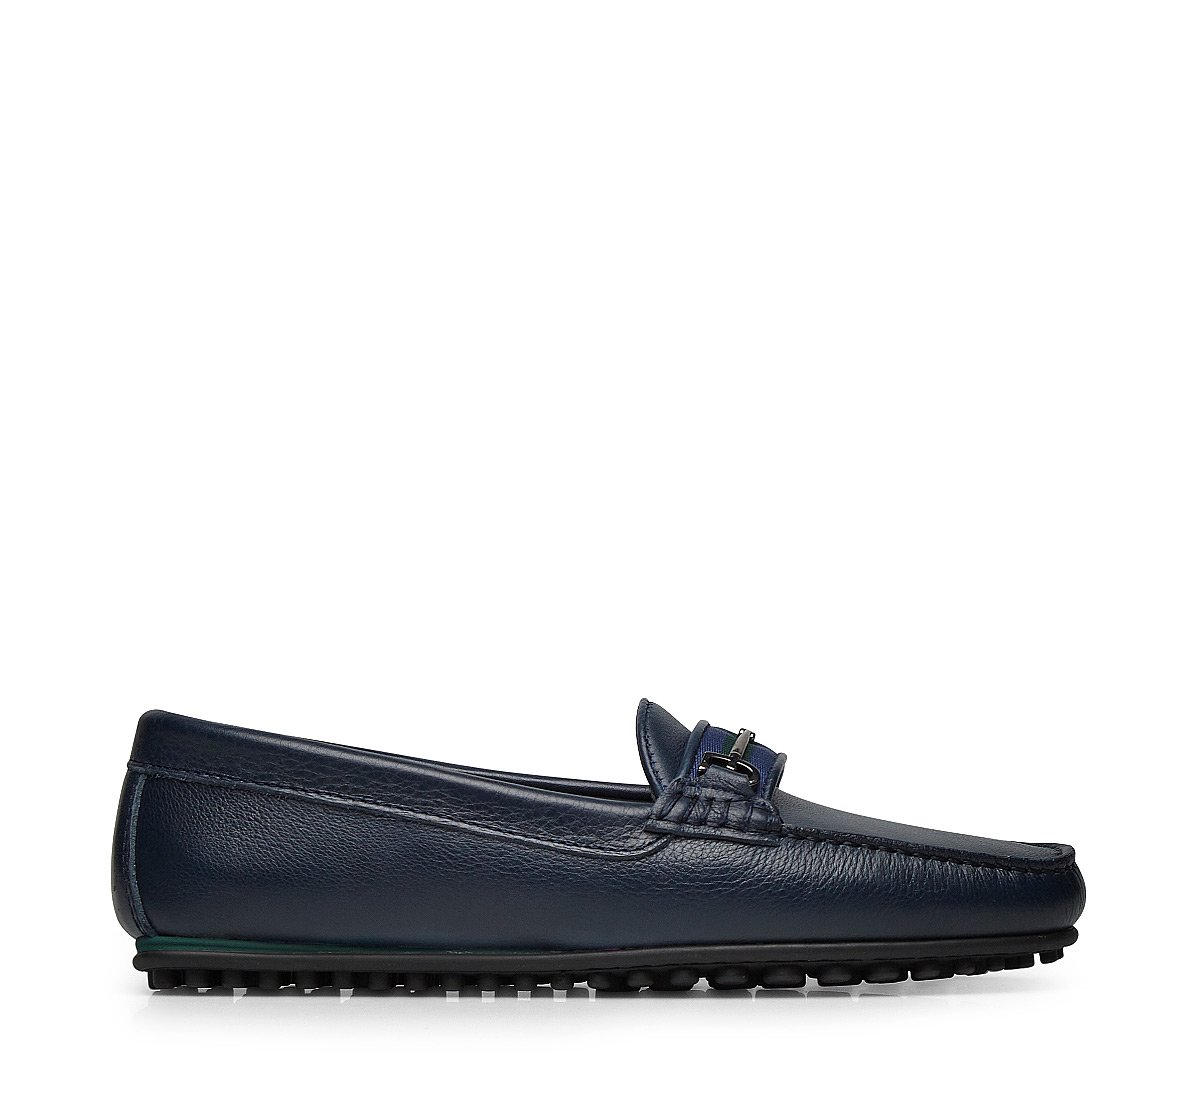 Driving loafer in soft nappa leather